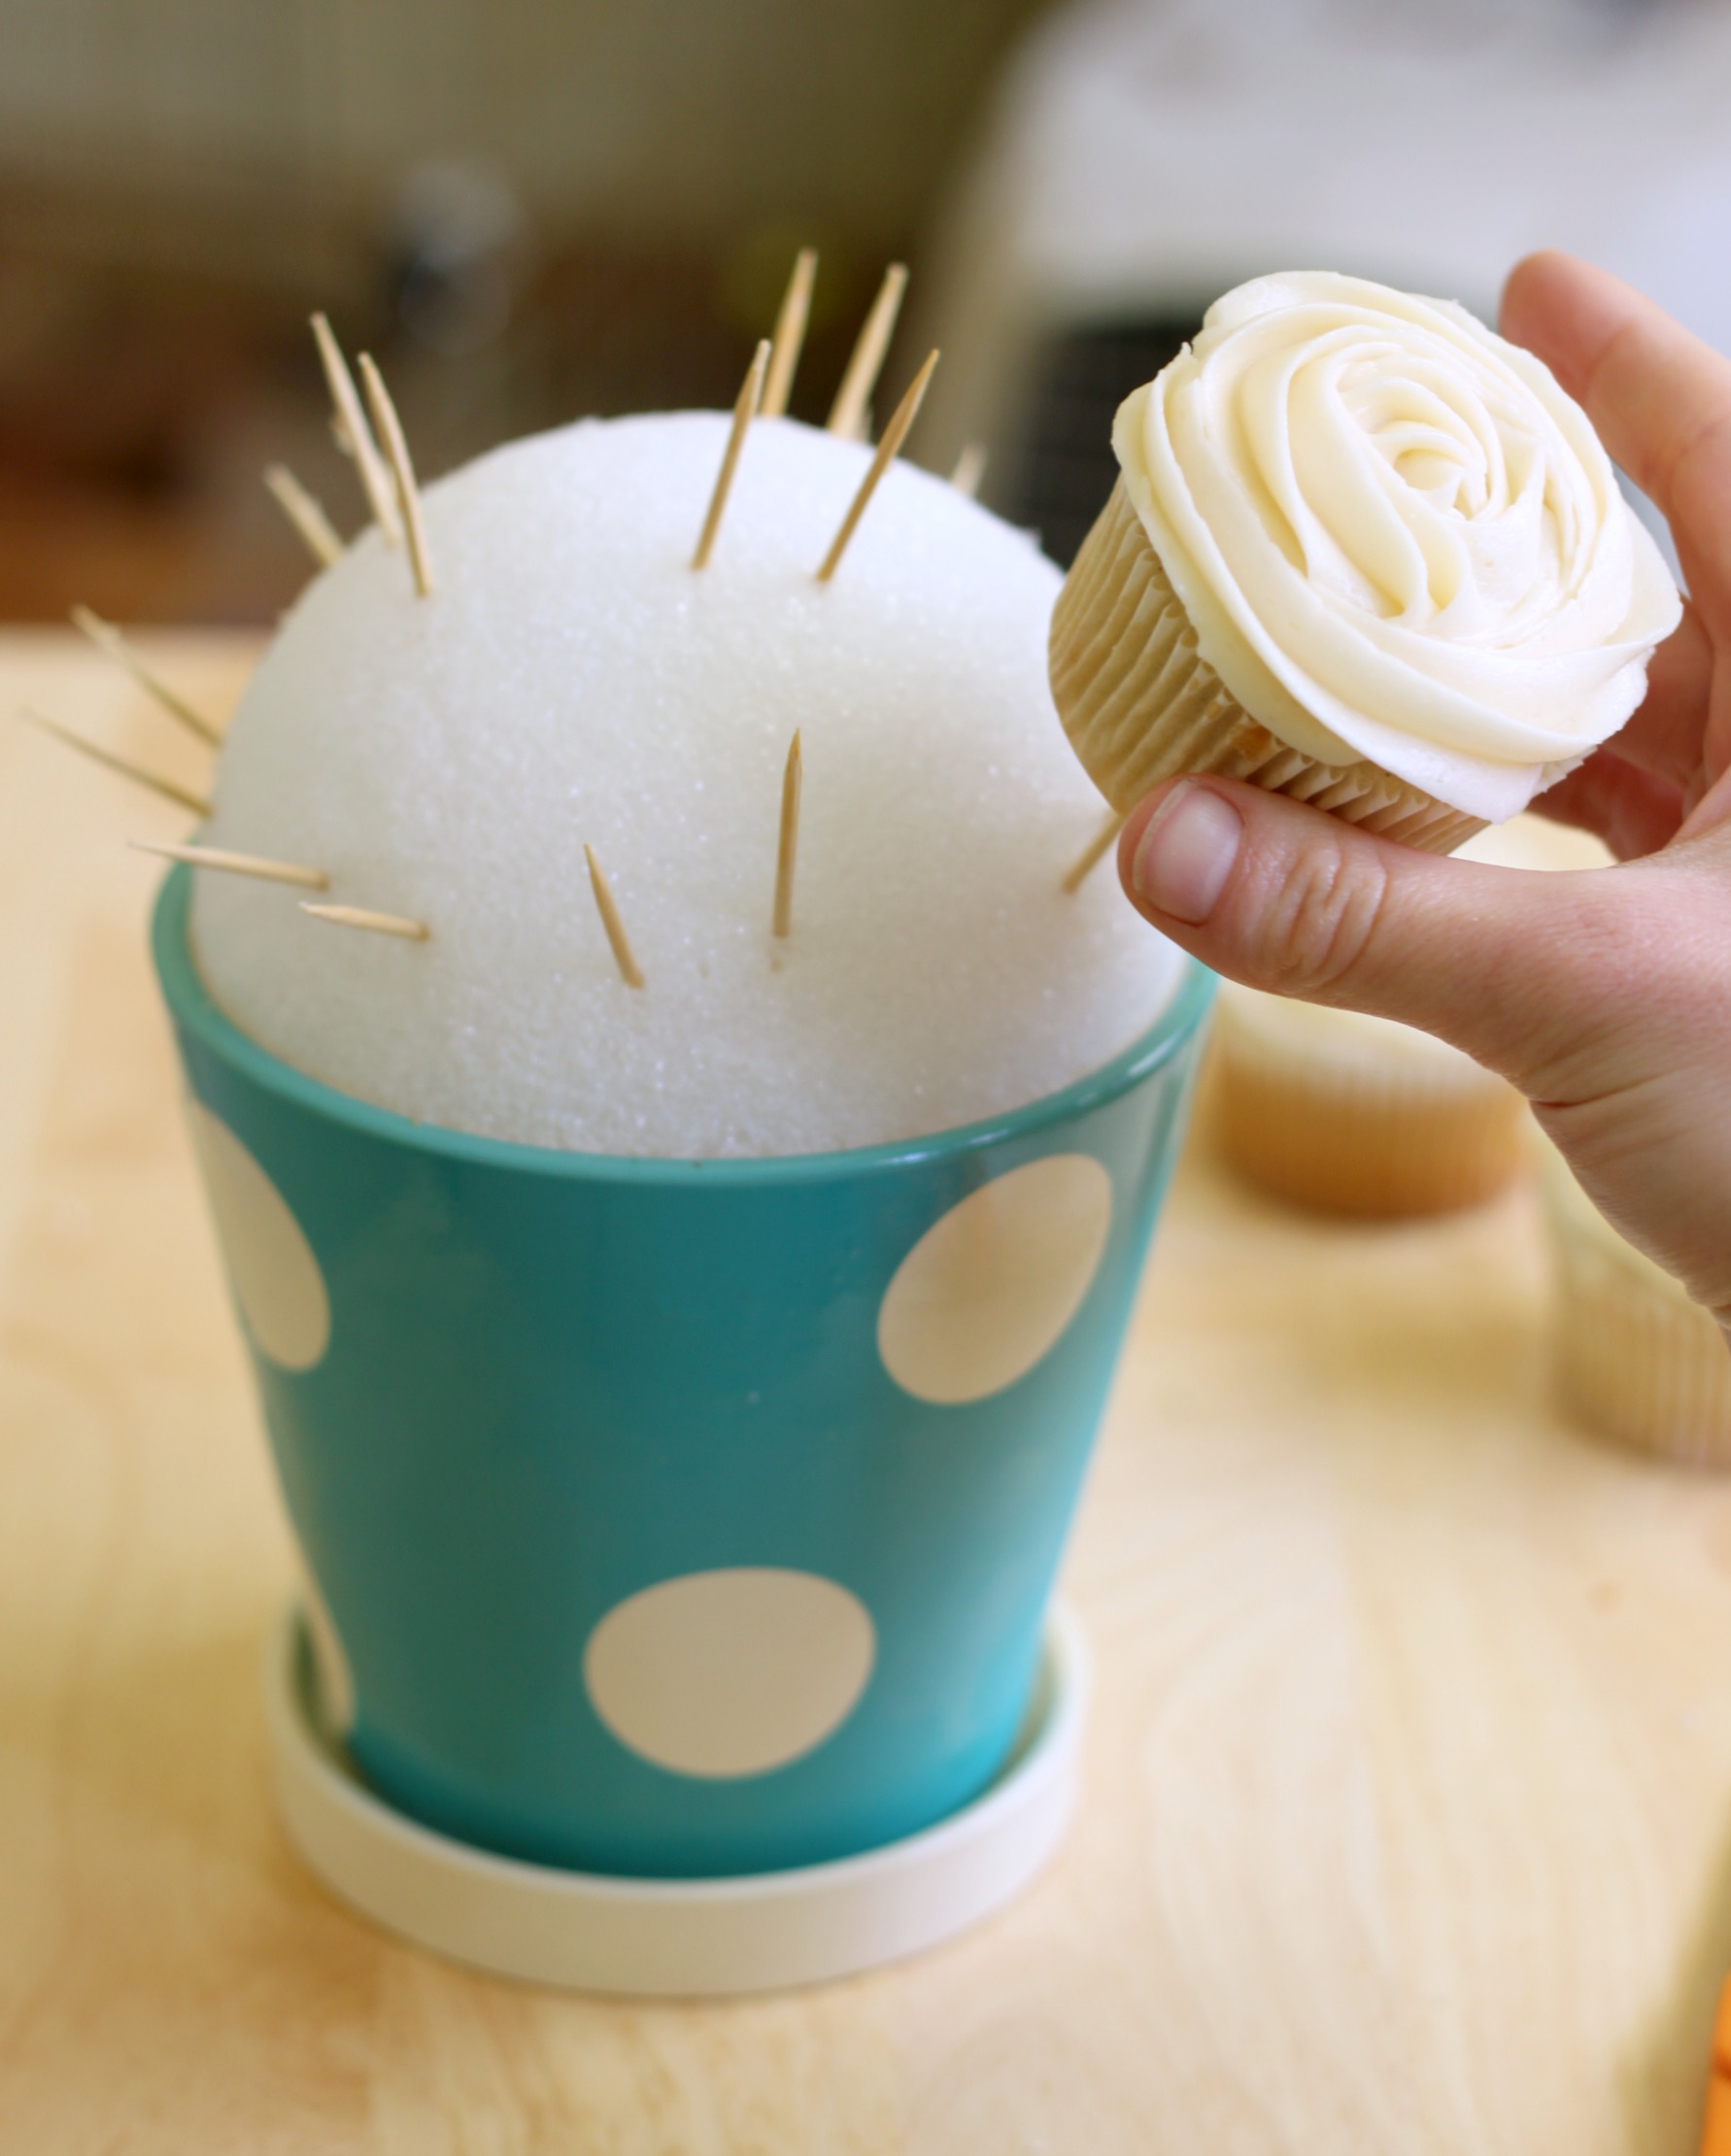 Place cupcake on two toothpicks